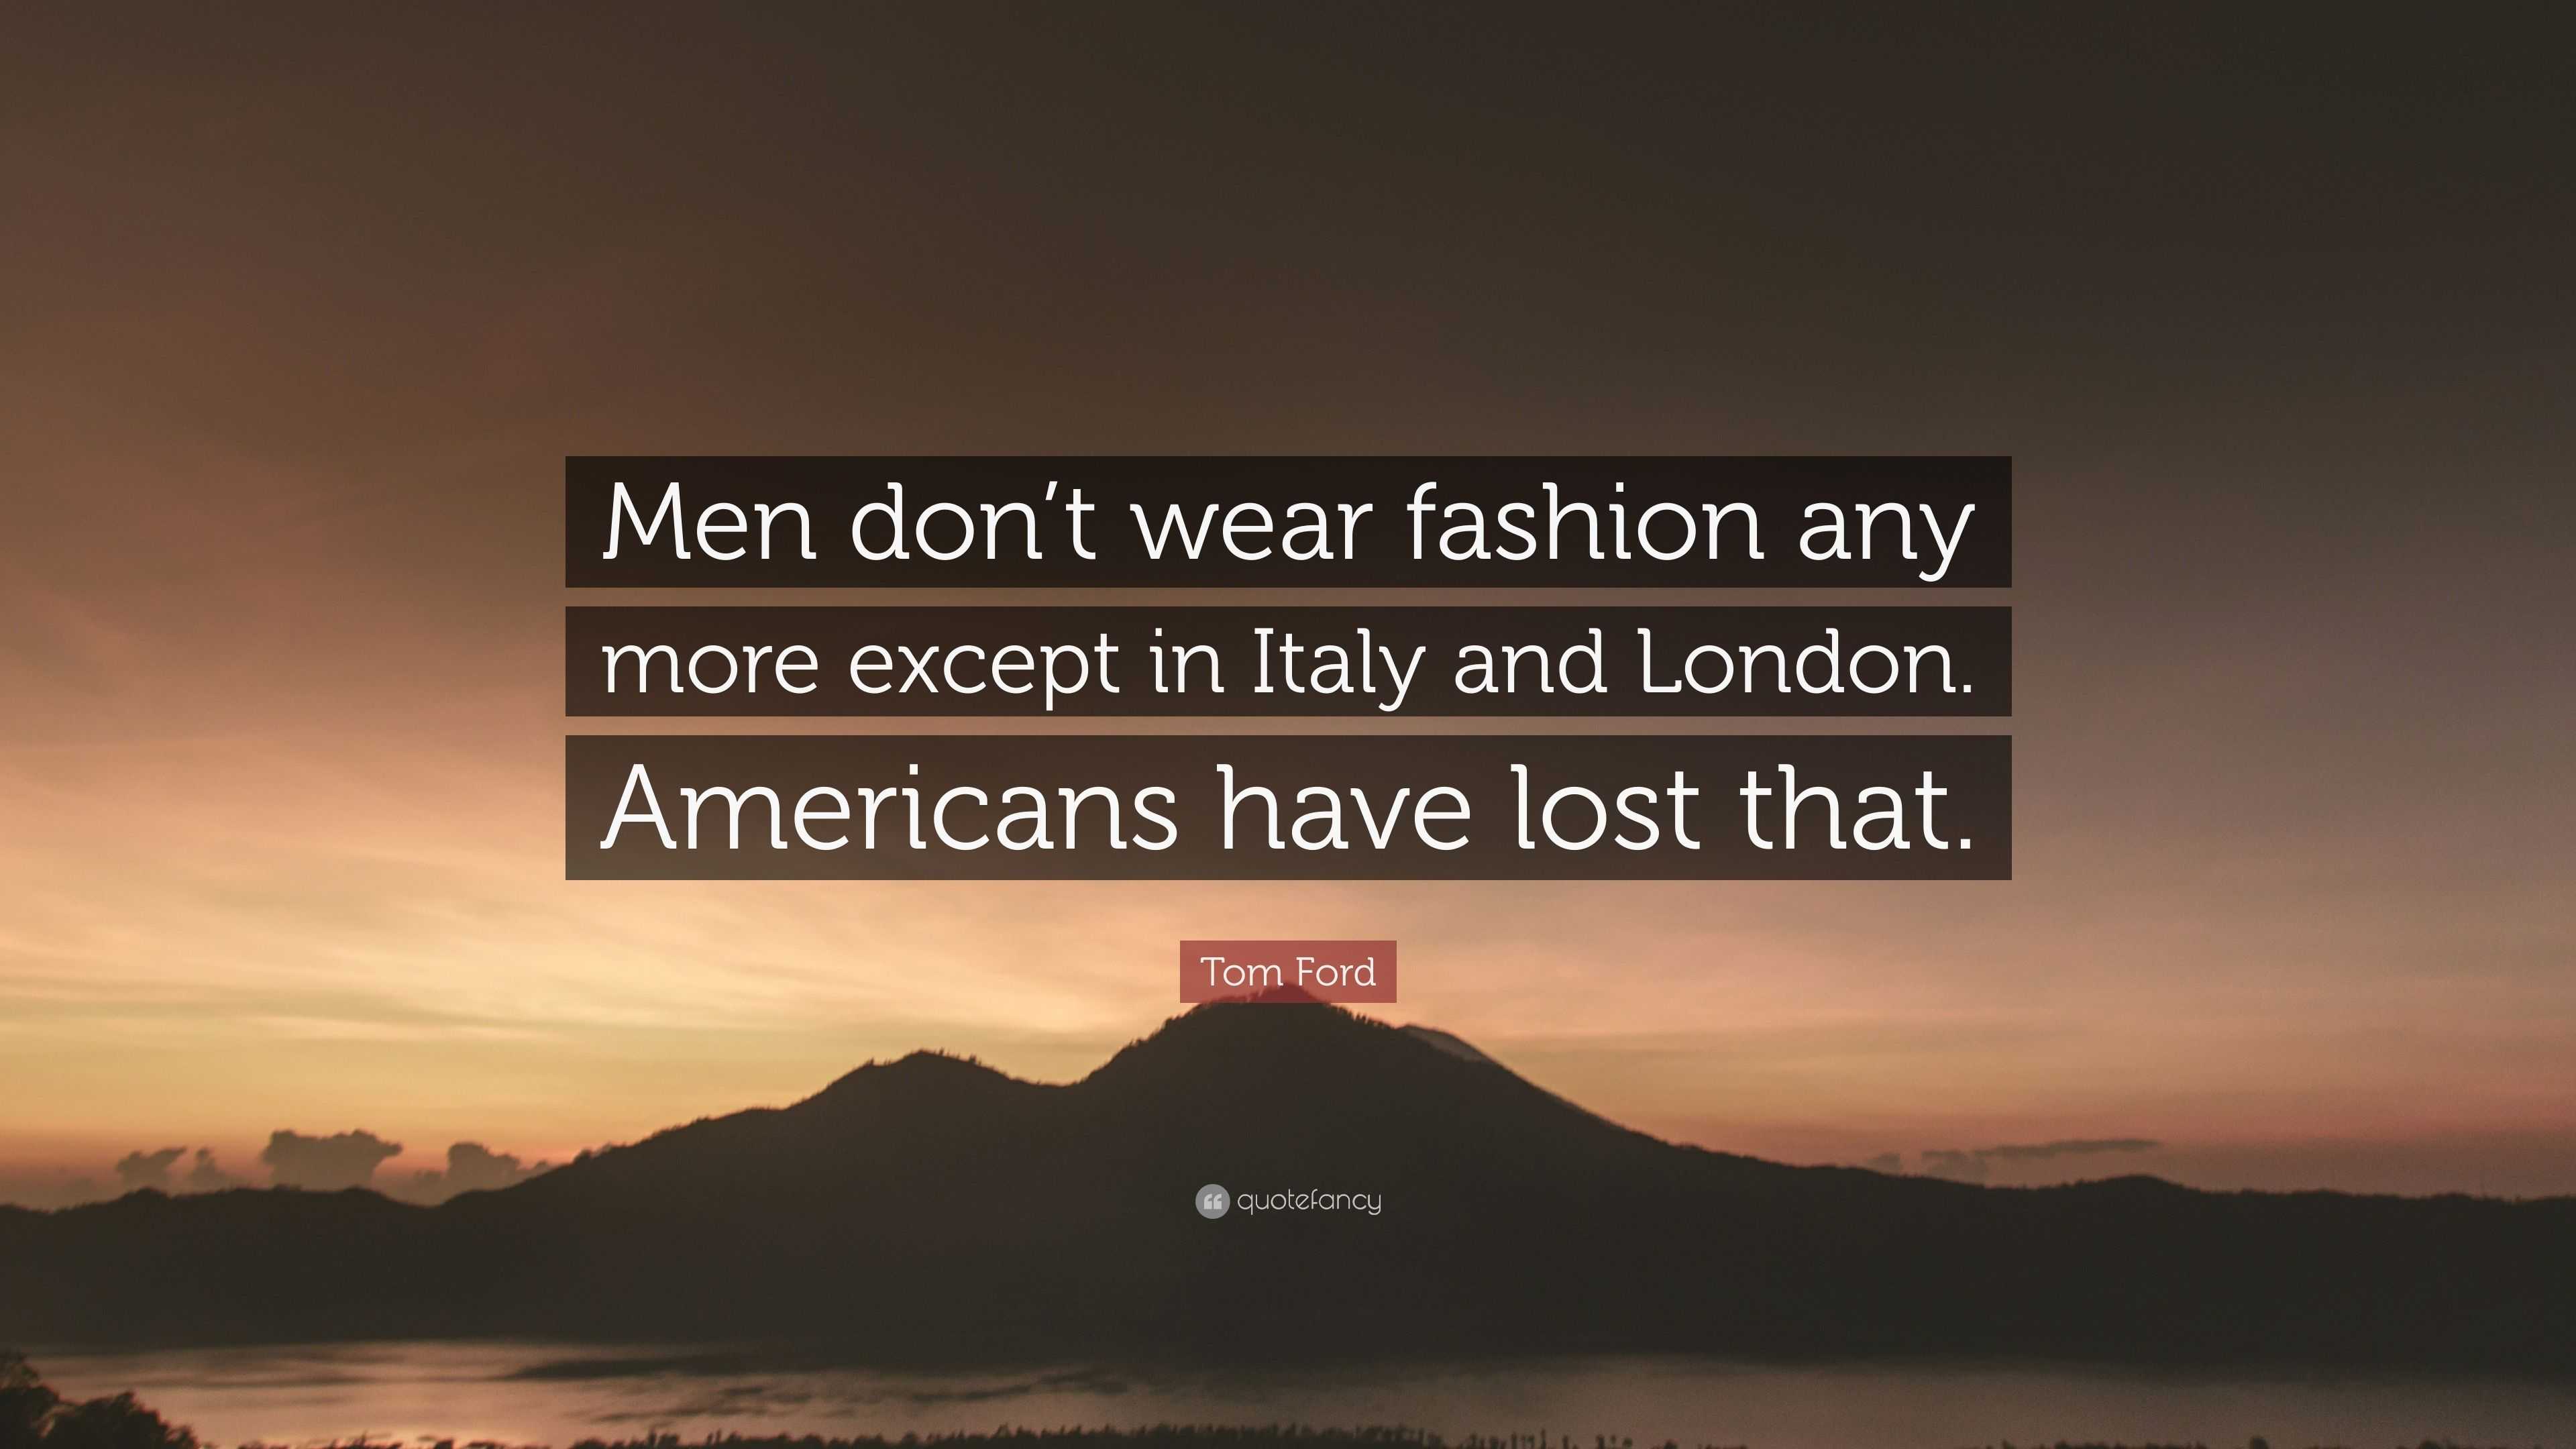 Tom Ford Quote: “Men don't wear fashion any more except in Italy and  London. Americans